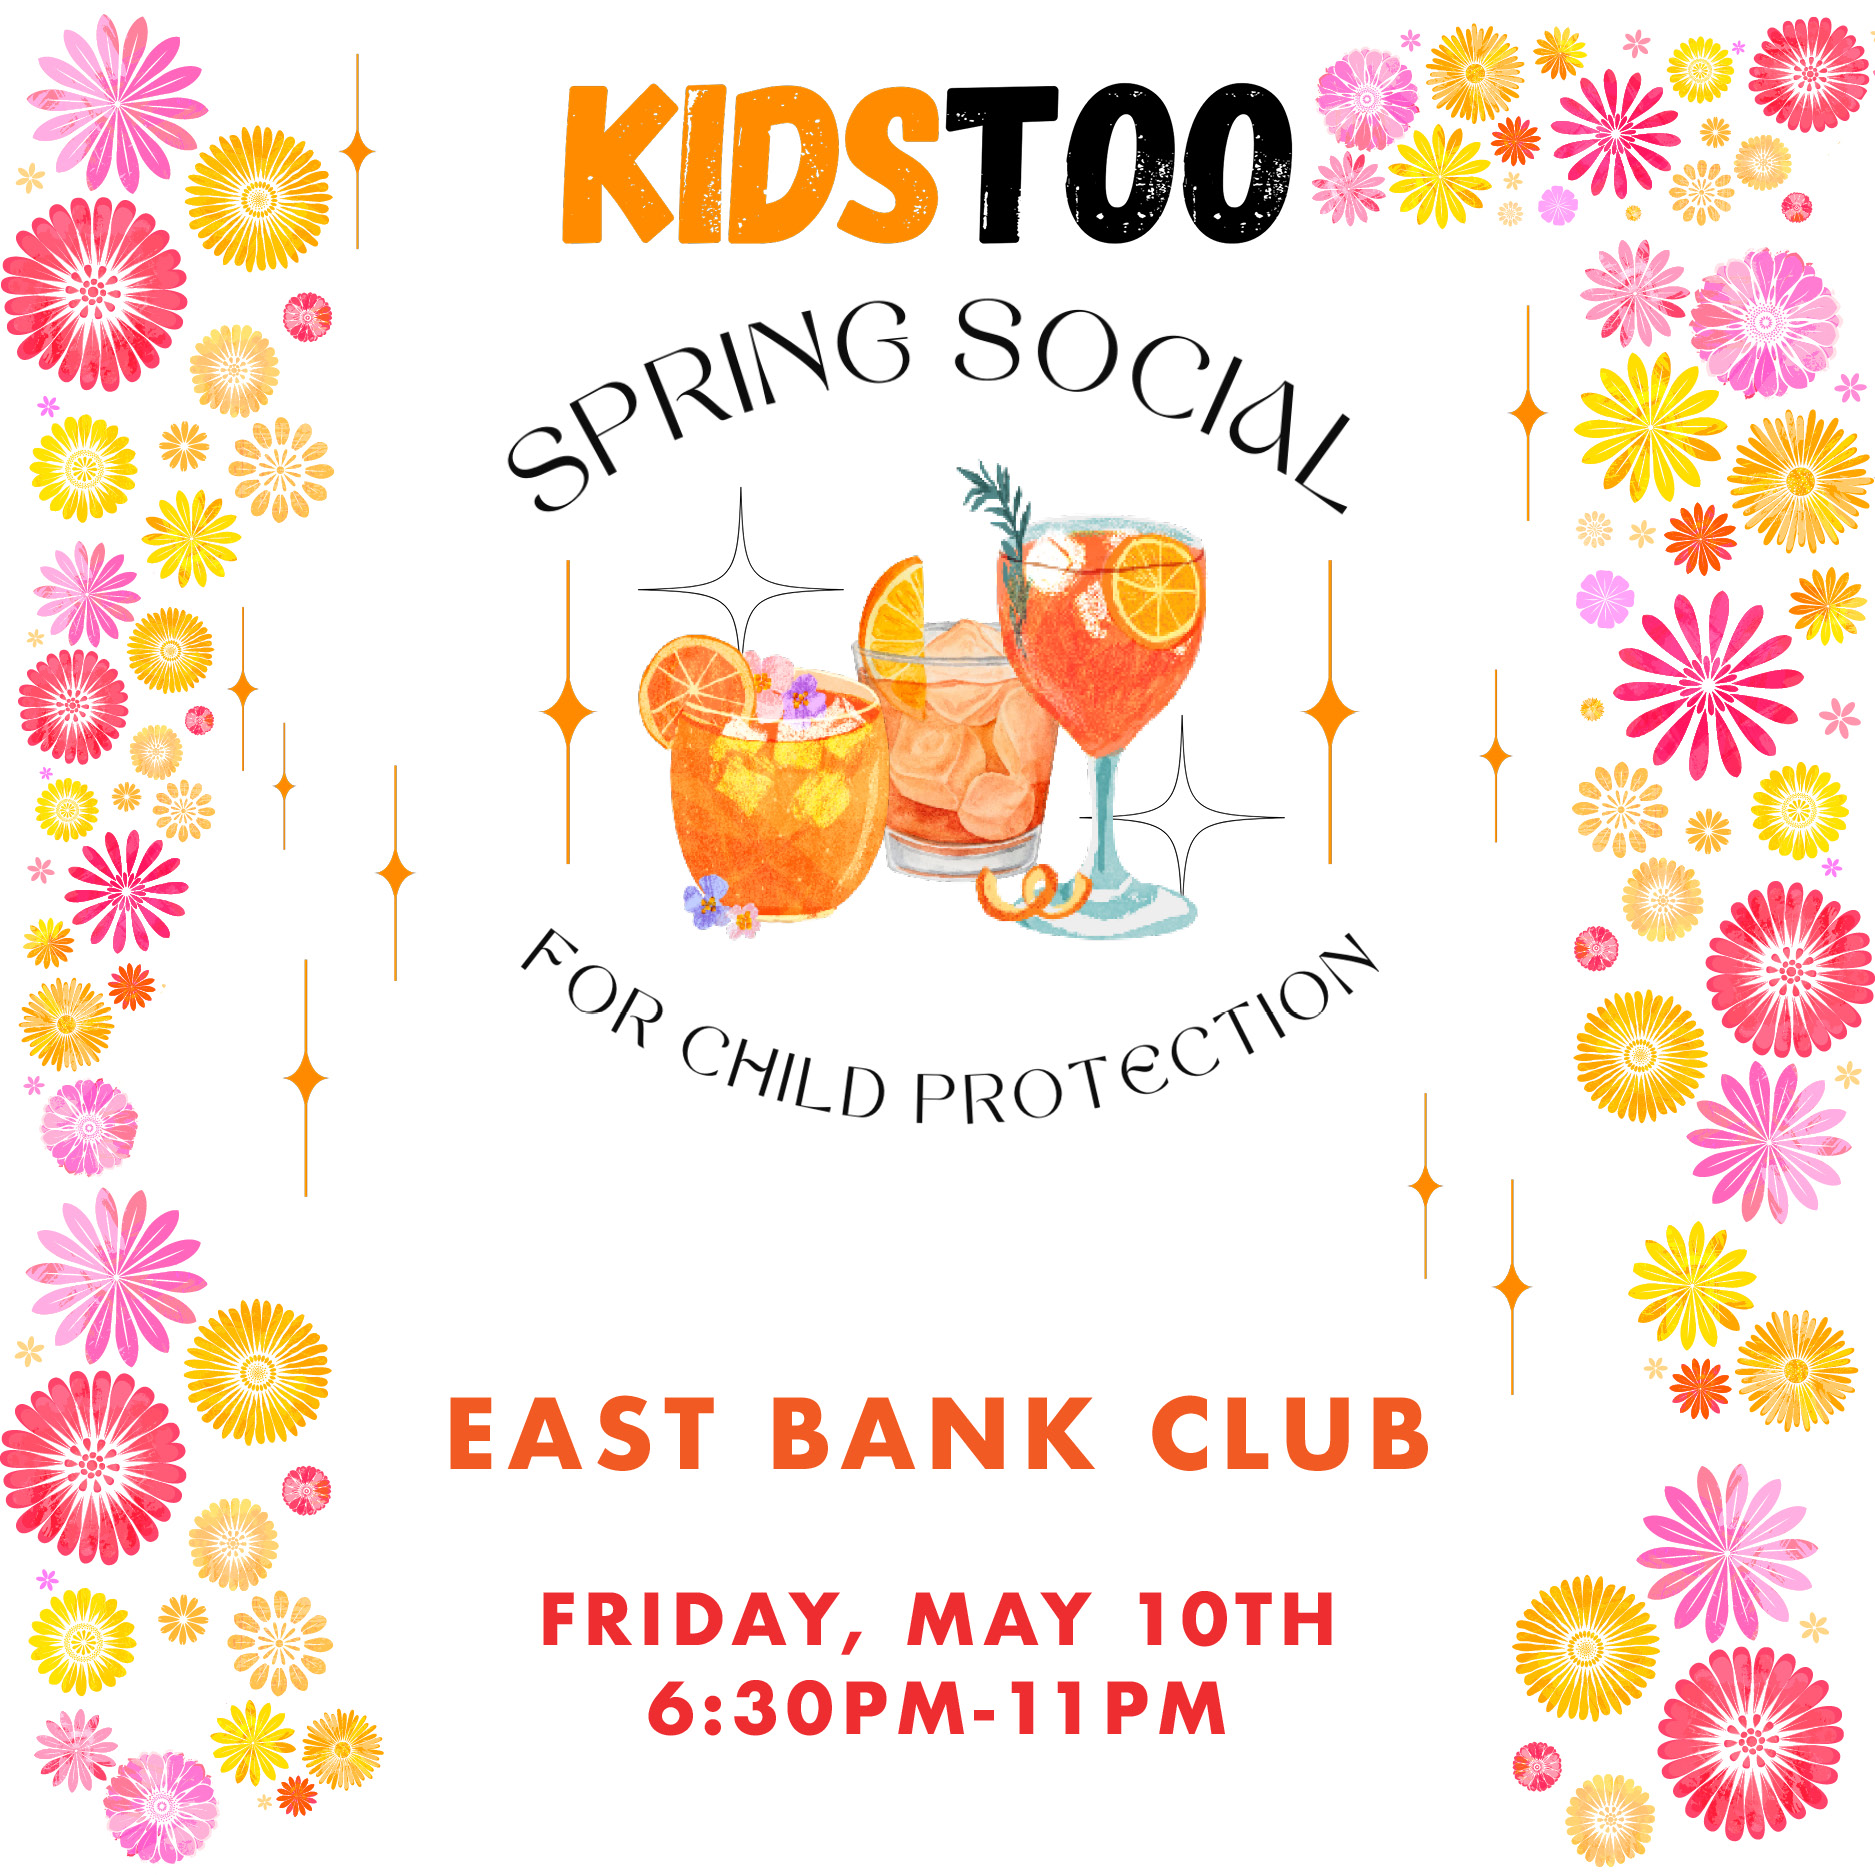 KIDS TOO Spring Social for Child Protection